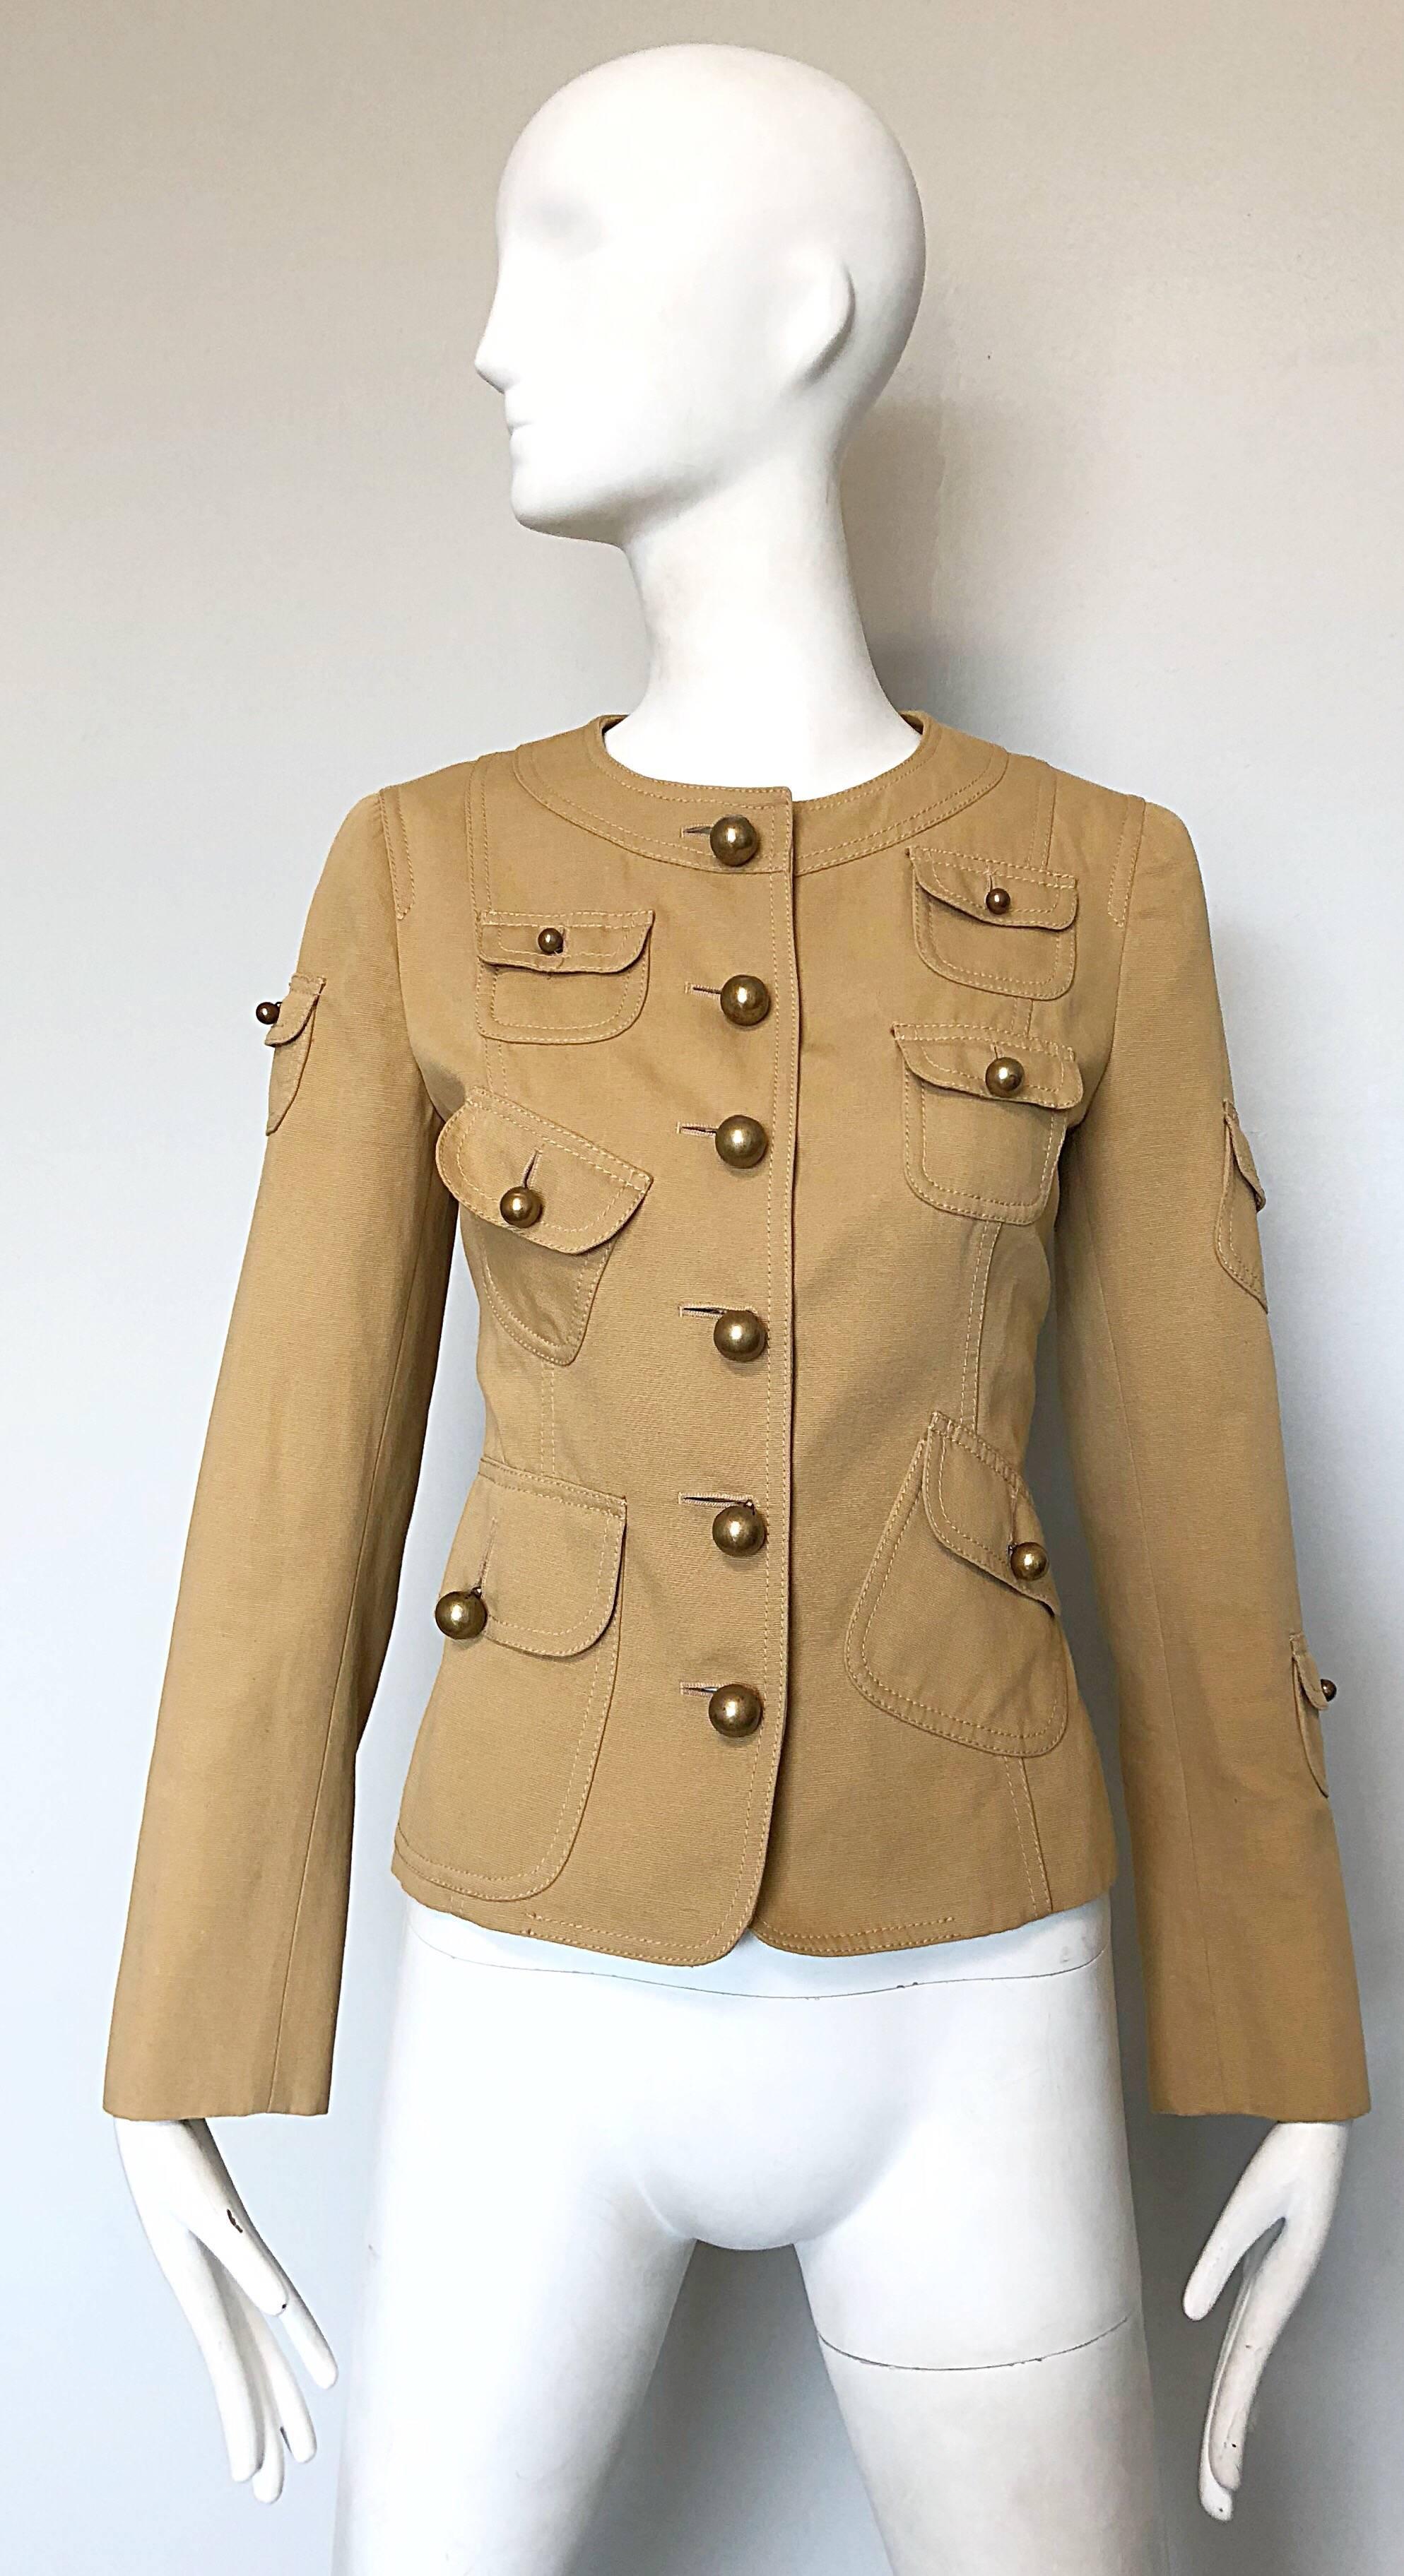 Stylish vintage 90s MOSCHINO CHEAP AND CHIC khaki cotton safari military inspired jacket! Features large round brass buttons up the front, and on each cargo pocket. Asymmetrically placed cargo pockets throughout, including on the front and on each